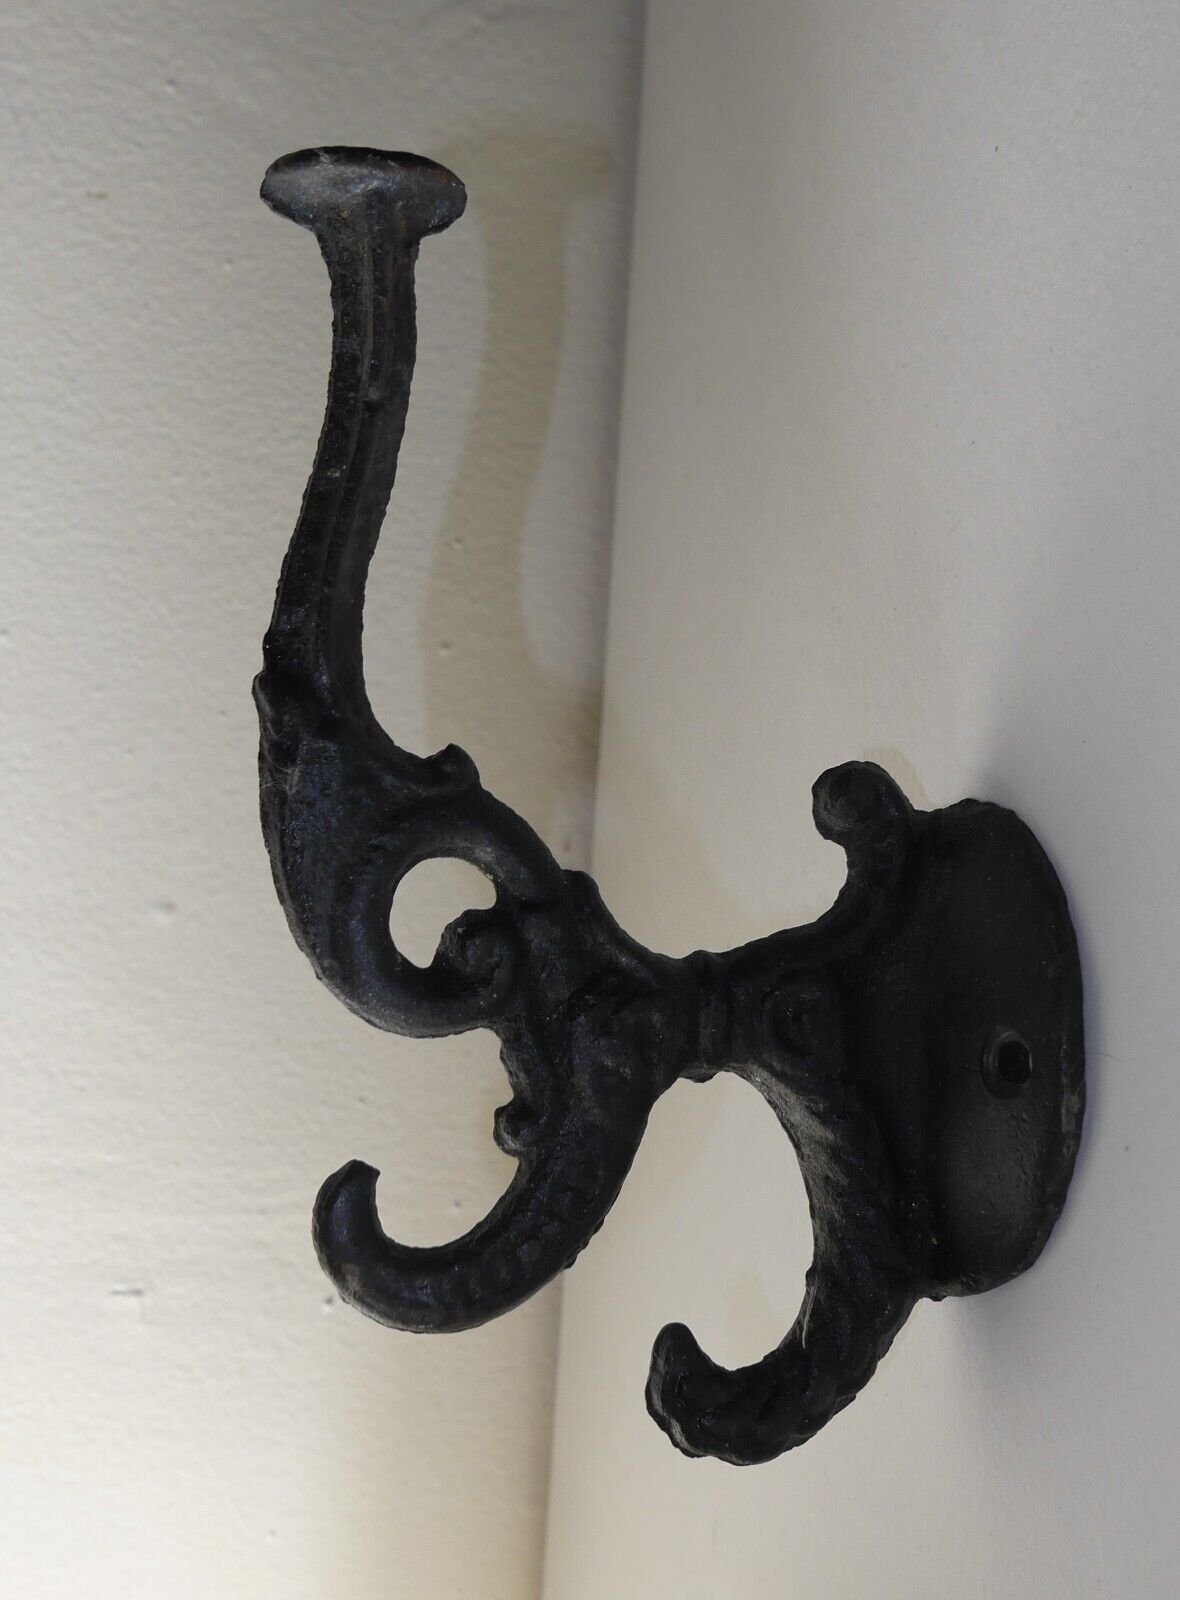 Vintage cast iron hat and coat hook